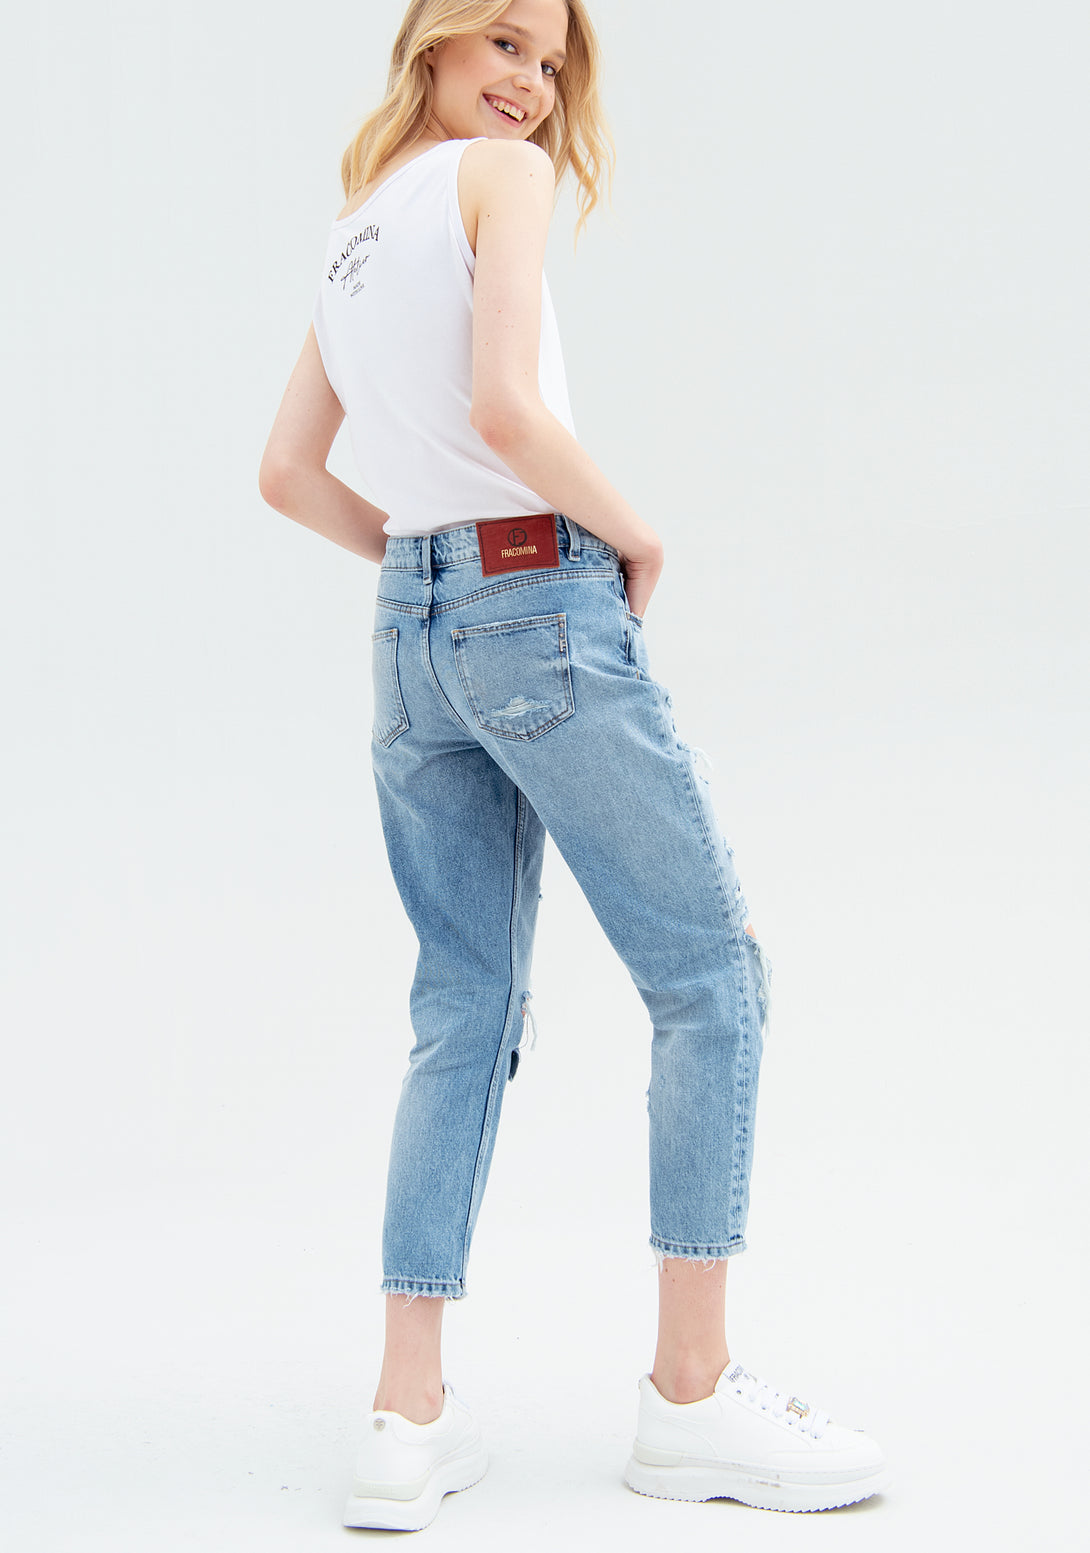 Jeans boyfriend fit cropped made in denim with light wash